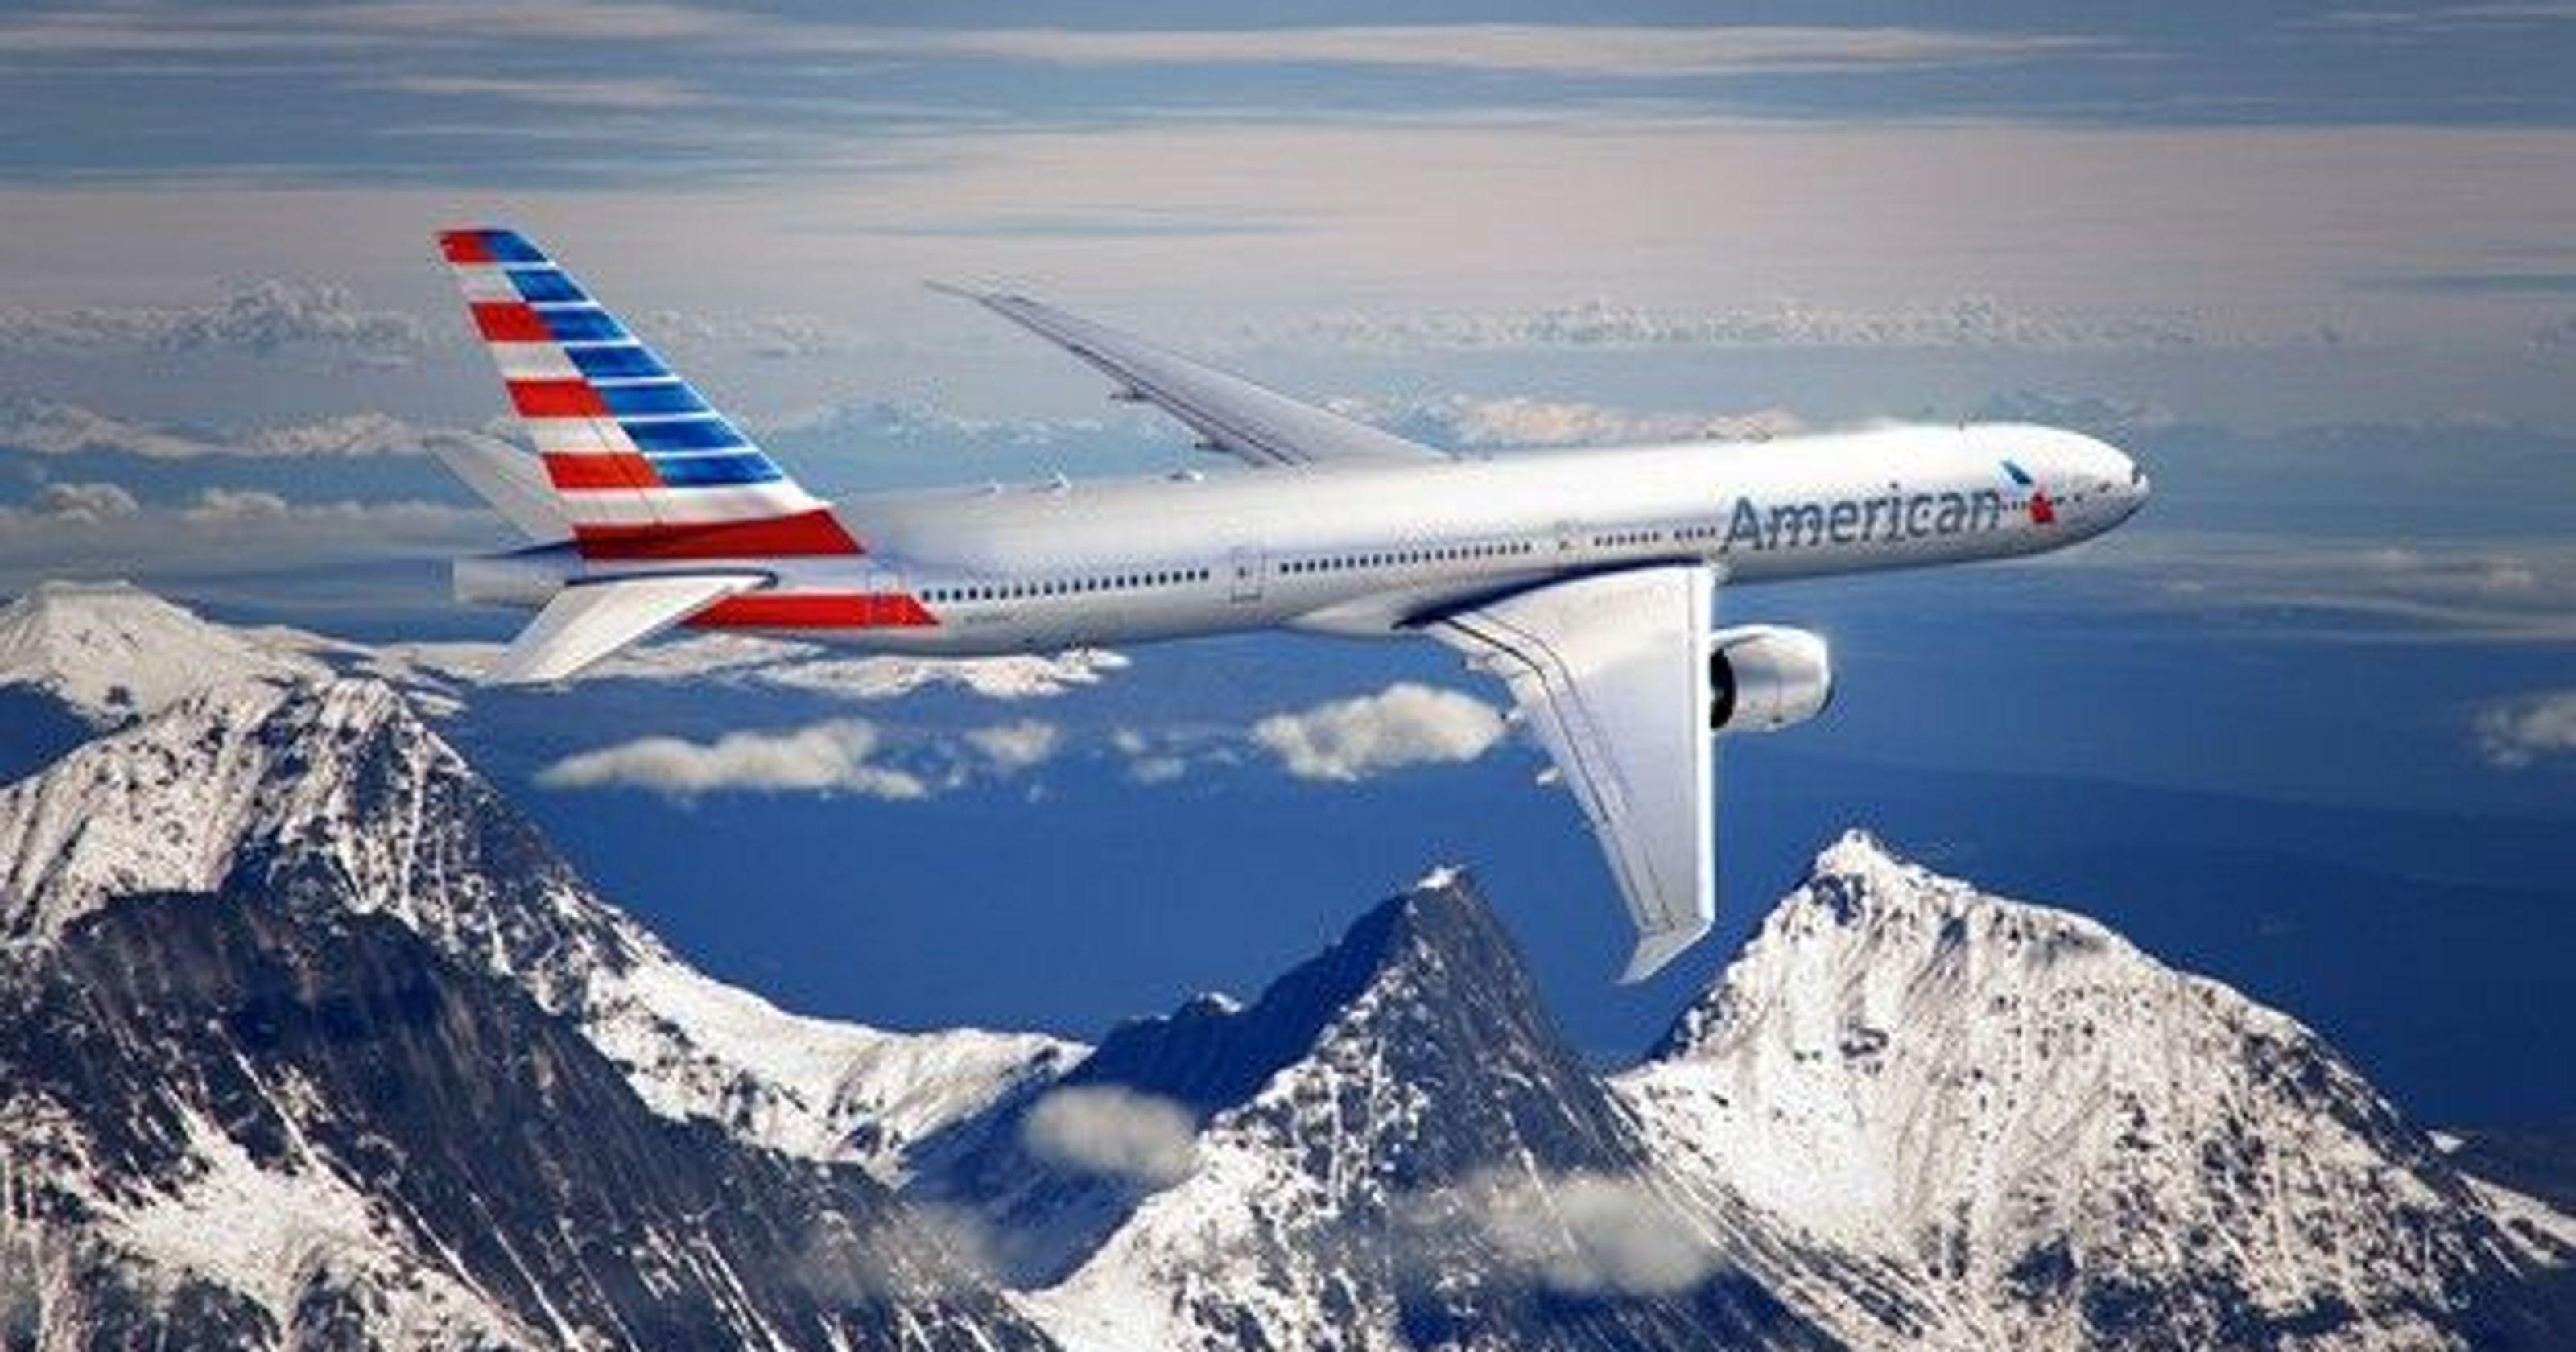 Airline with Red Swoosh Logo - Copyright board rejects AA logo - again